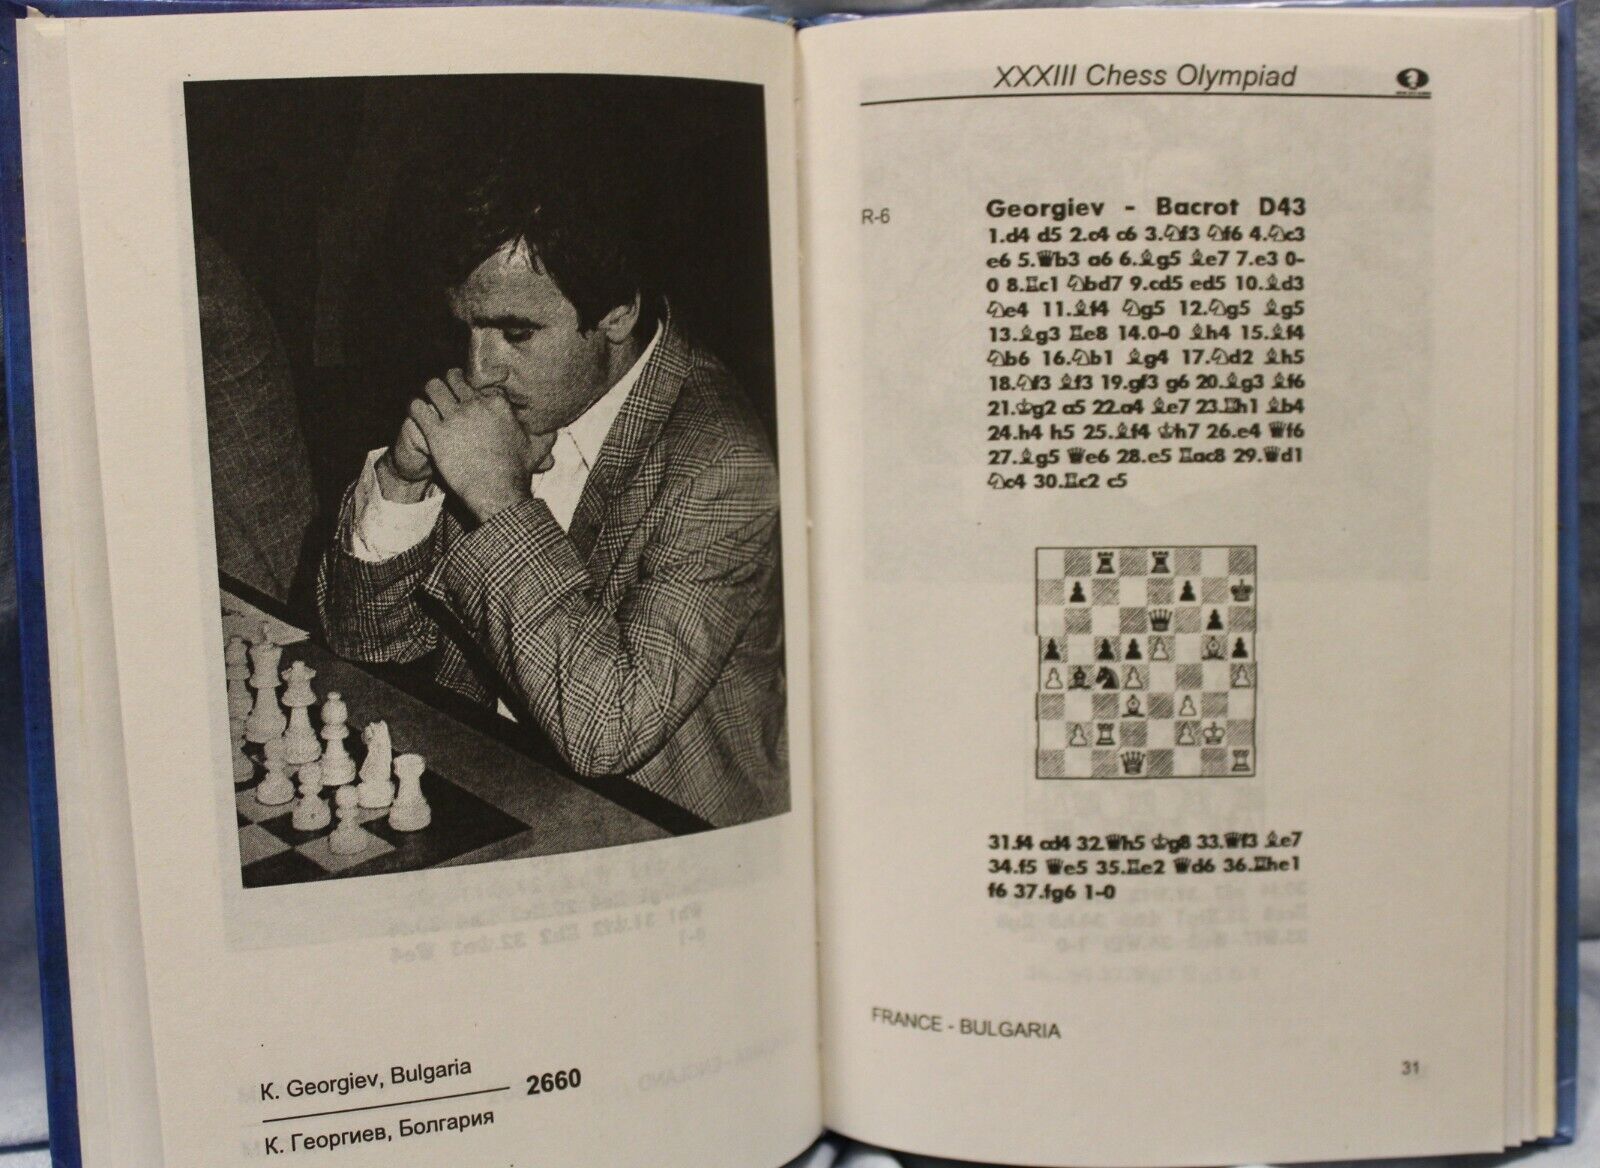 11004.Chess Book in English and Russian. 33 Chess Olympiad. Elista, Papuev Victor 1999